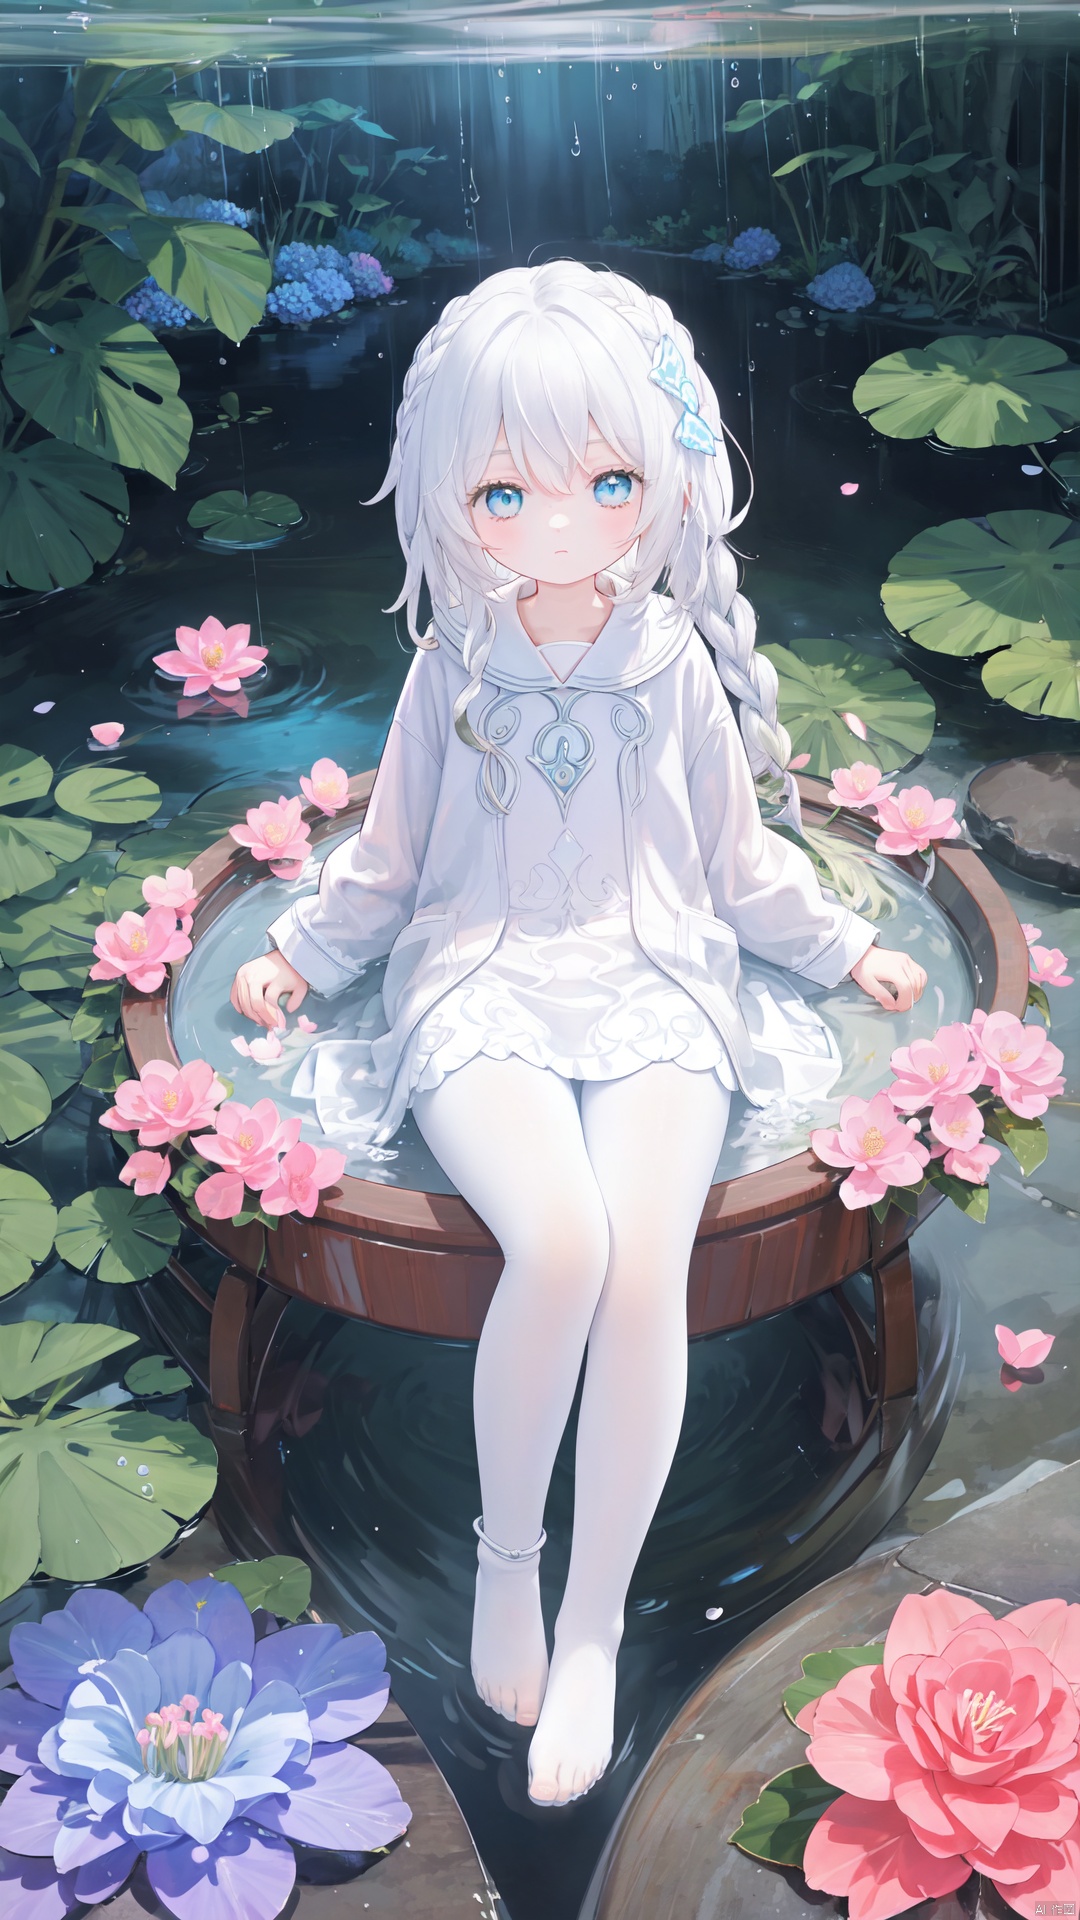  loli, petite, long hair, floating hair, messy hair, 1girl, white hair, white jacket, afloat, air bubble, bathtub, beach, berry, blue eyes, blue flower, bouquet, bow, braid, bubble, camellia, caustics, clover, coral, daisy, floral background, flower, food, fruit, hibiscus, horizon, hydrangea, in water, leaf, lily \(flower\), lily of the valley, lily pad, long sleeves, looking at viewer, lotus, ocean, partially submerged, petals on liquid, pink flower, purple flower, rain, red flower, ripples, rose, sailor collar, shallow water, snowflakes, white pantyhose, solo, submerged, waves, white rose, yellow flower,,,,,, mz-hd, backlight